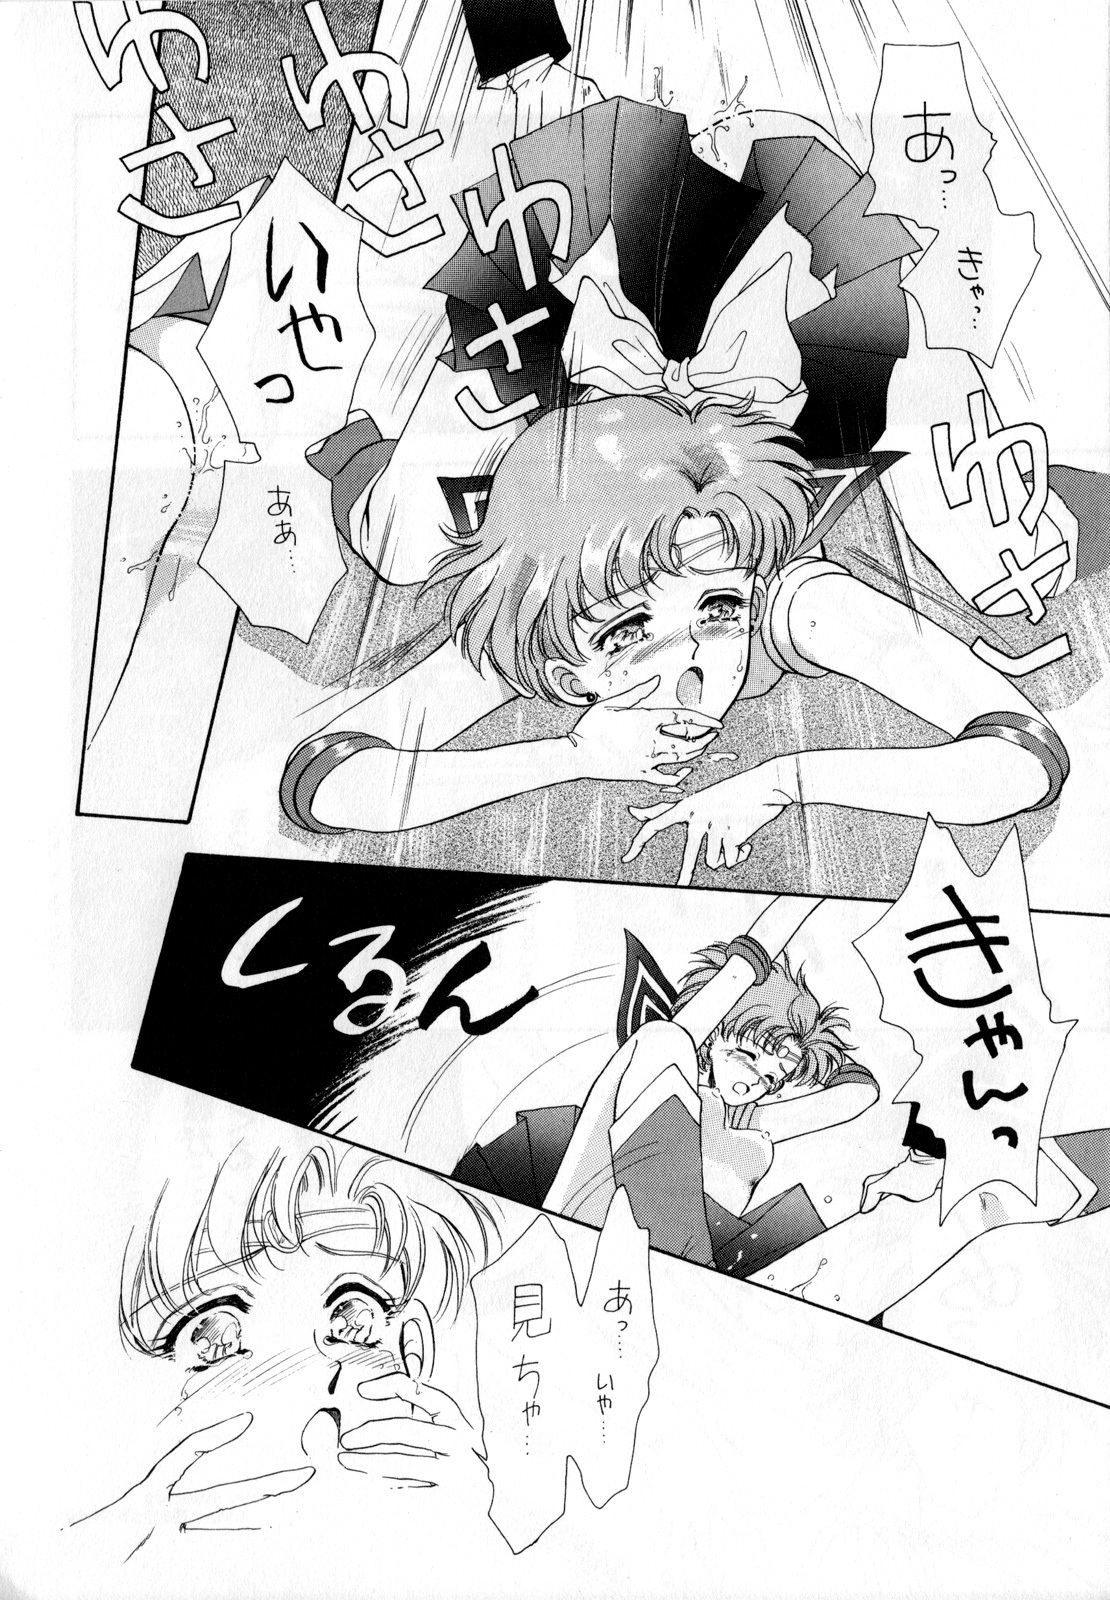 [Anthology] Lunatic Party 1 (Sailor Moon) page 15 full